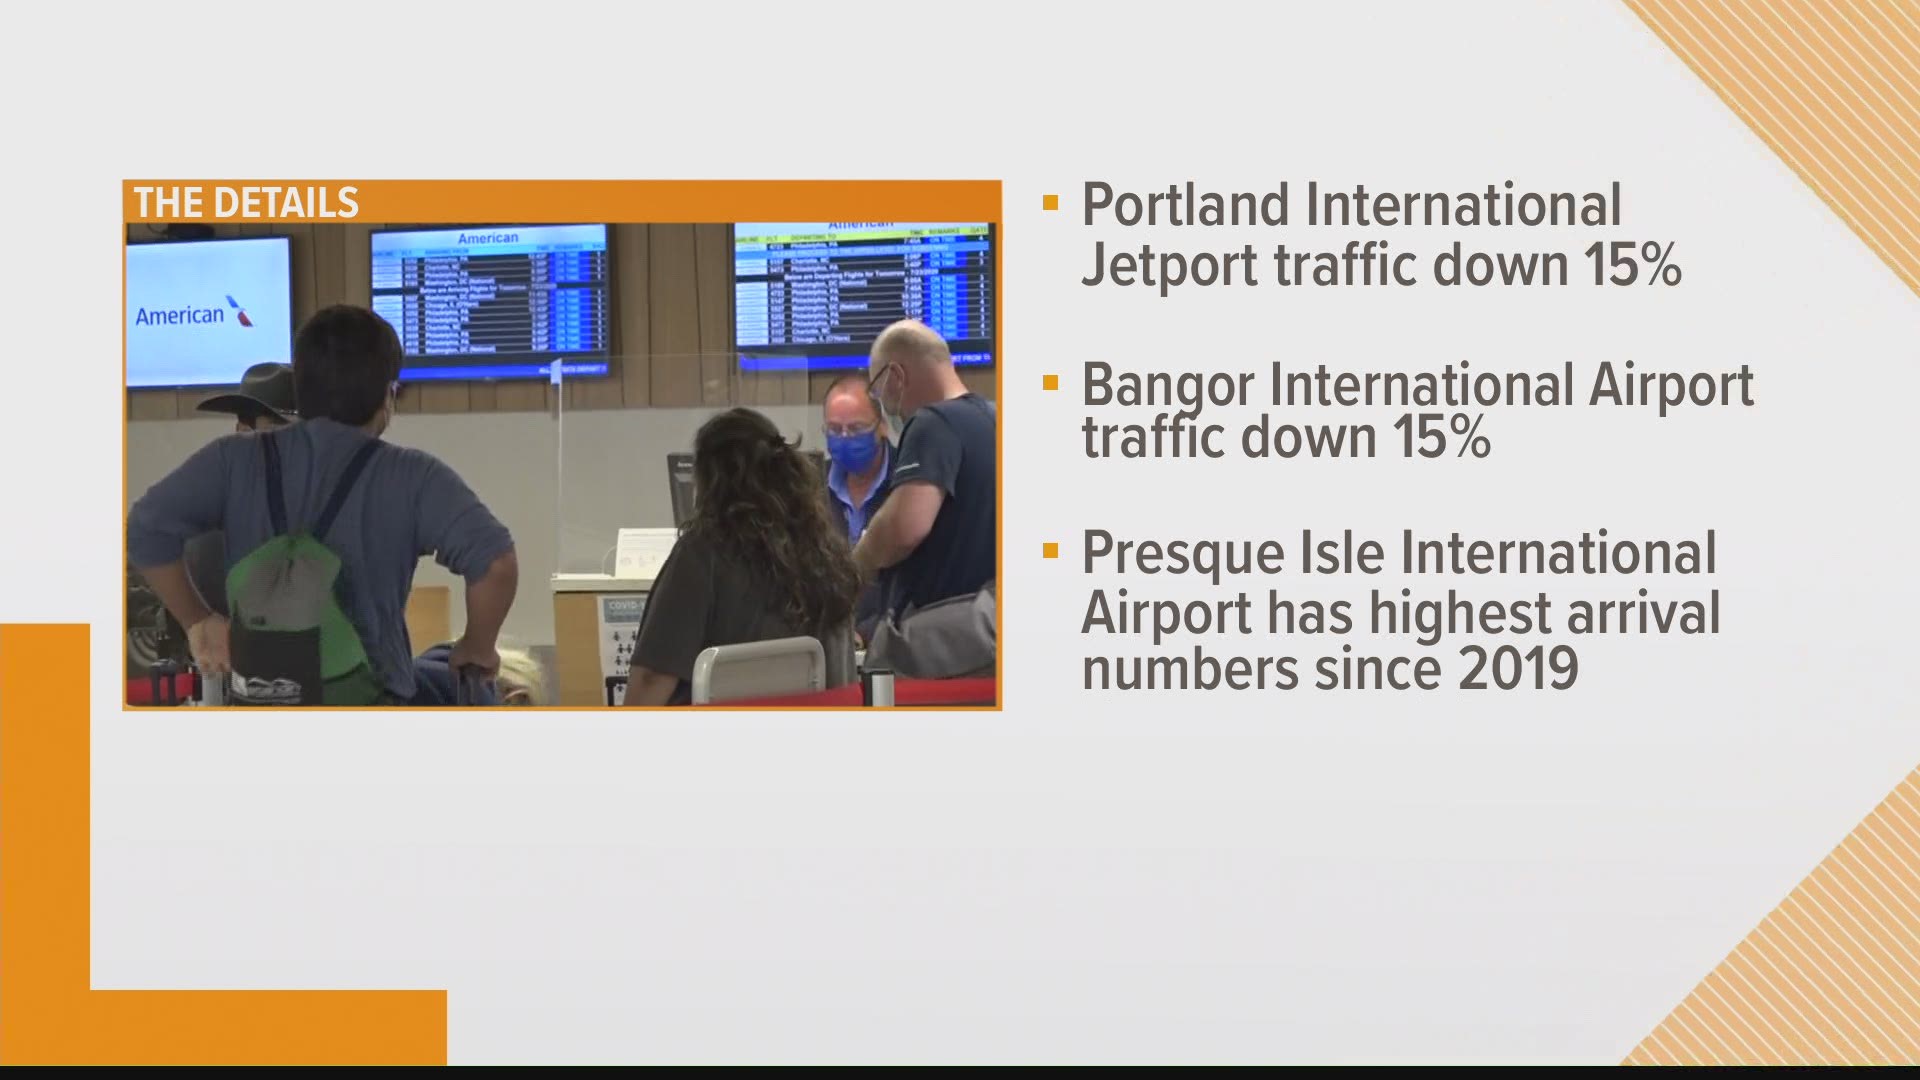 Maine airports are the busiest they’ve been since 2019, according to three of the state's airport directors.